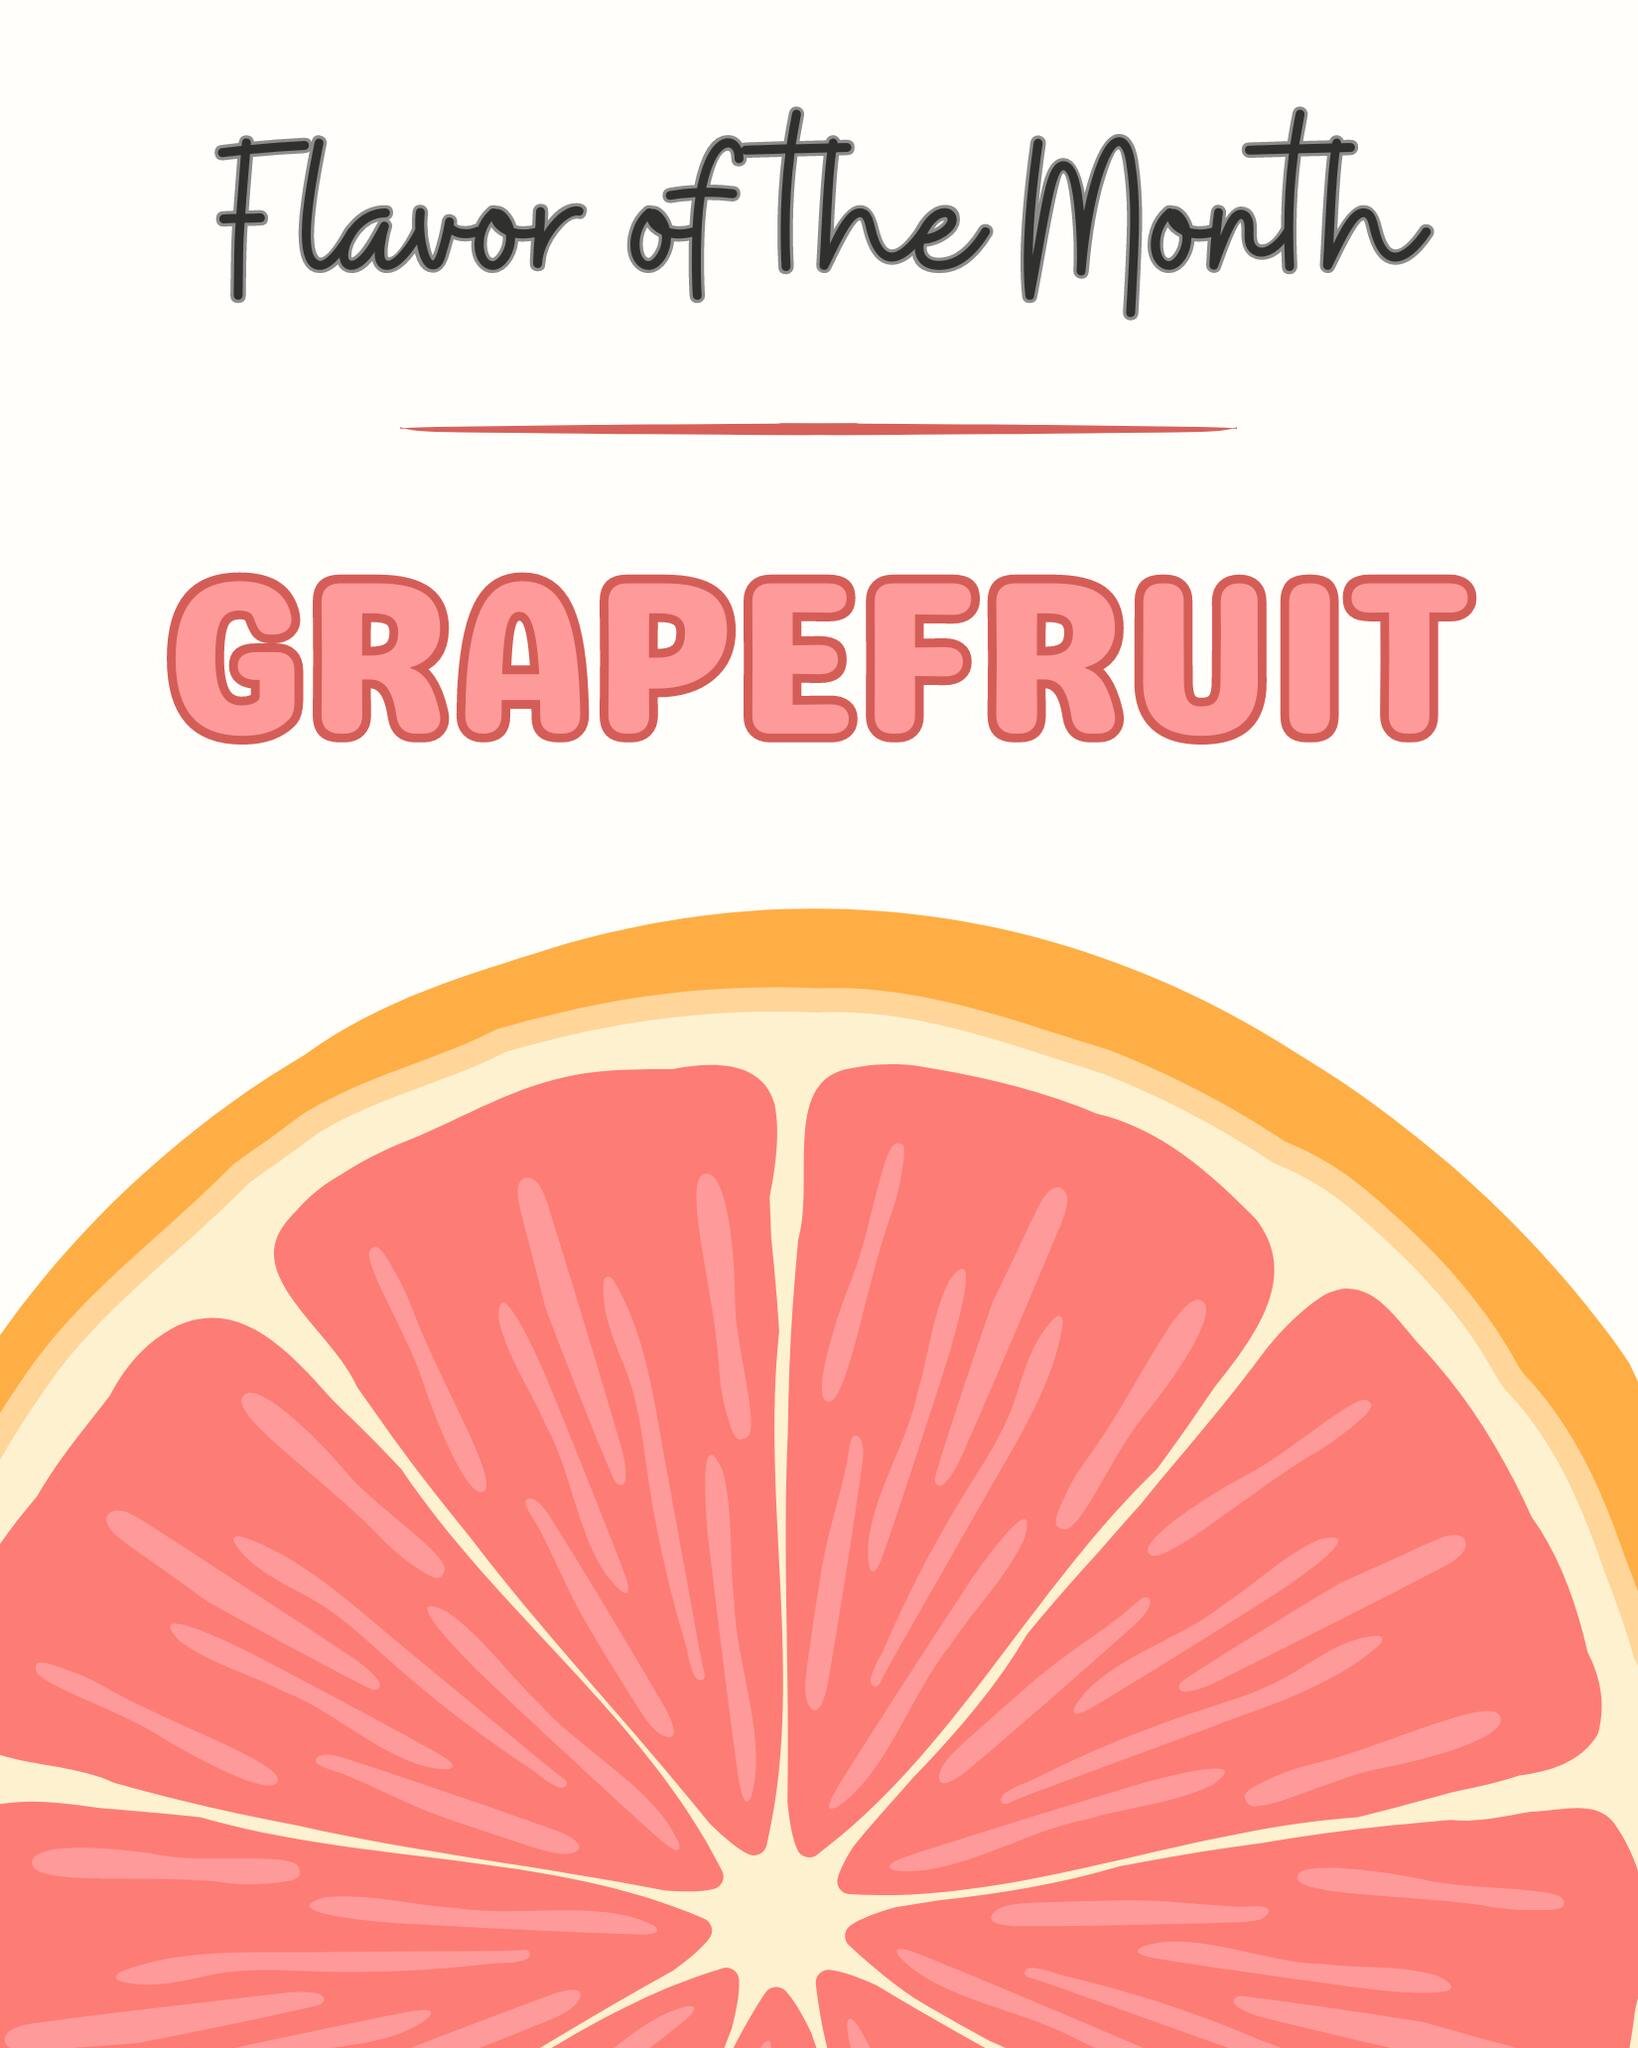 You might've guessed it if you played the crossword! Our #FOTM is GRAPEFRUIT! 😋

We also have a few faves coming back this month, don't miss out!!
#Peach #Grape #Honeydew #Sangria

#Grapefruit #ItalianIce #WaterIce #FrozenCustard #Gelati #OhMyGelati